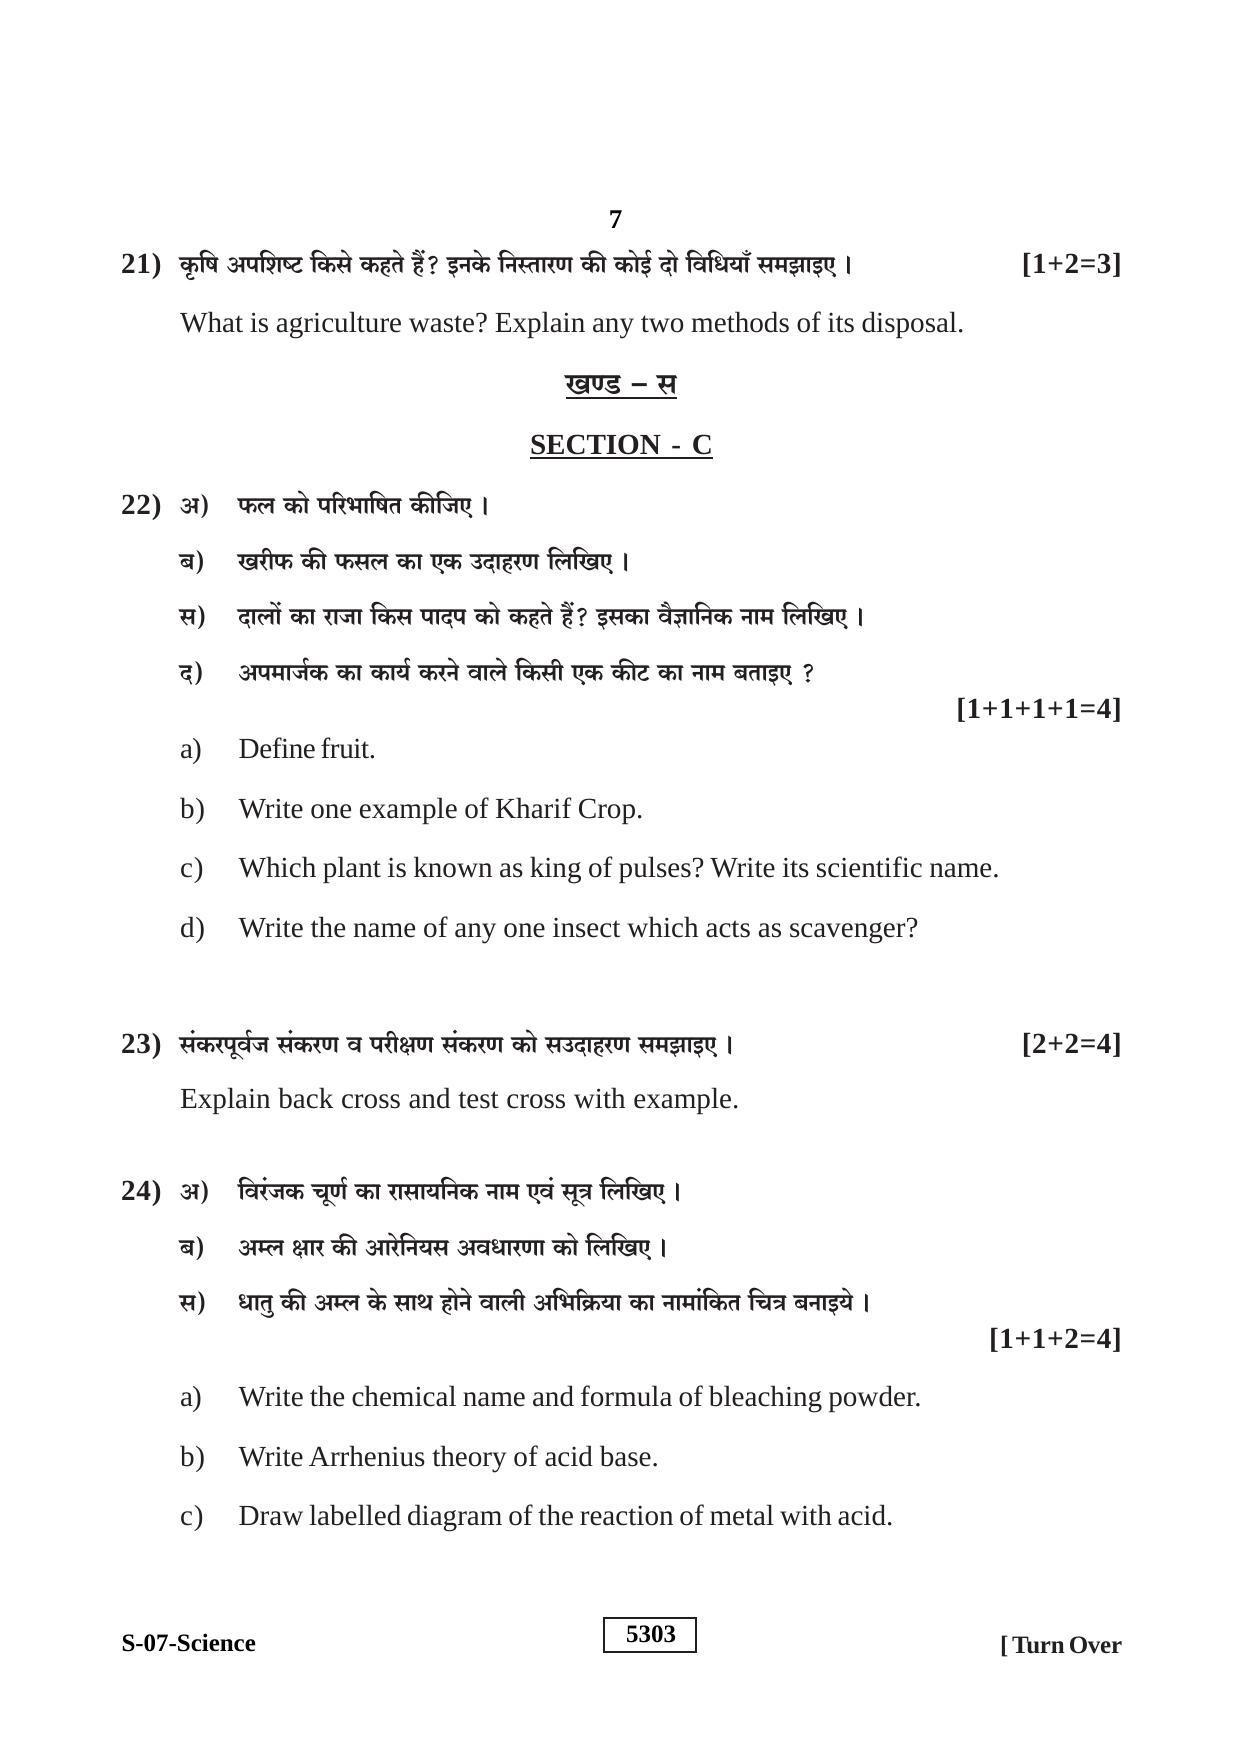 RBSE Class 10 Science 2020 Question Paper - Page 7